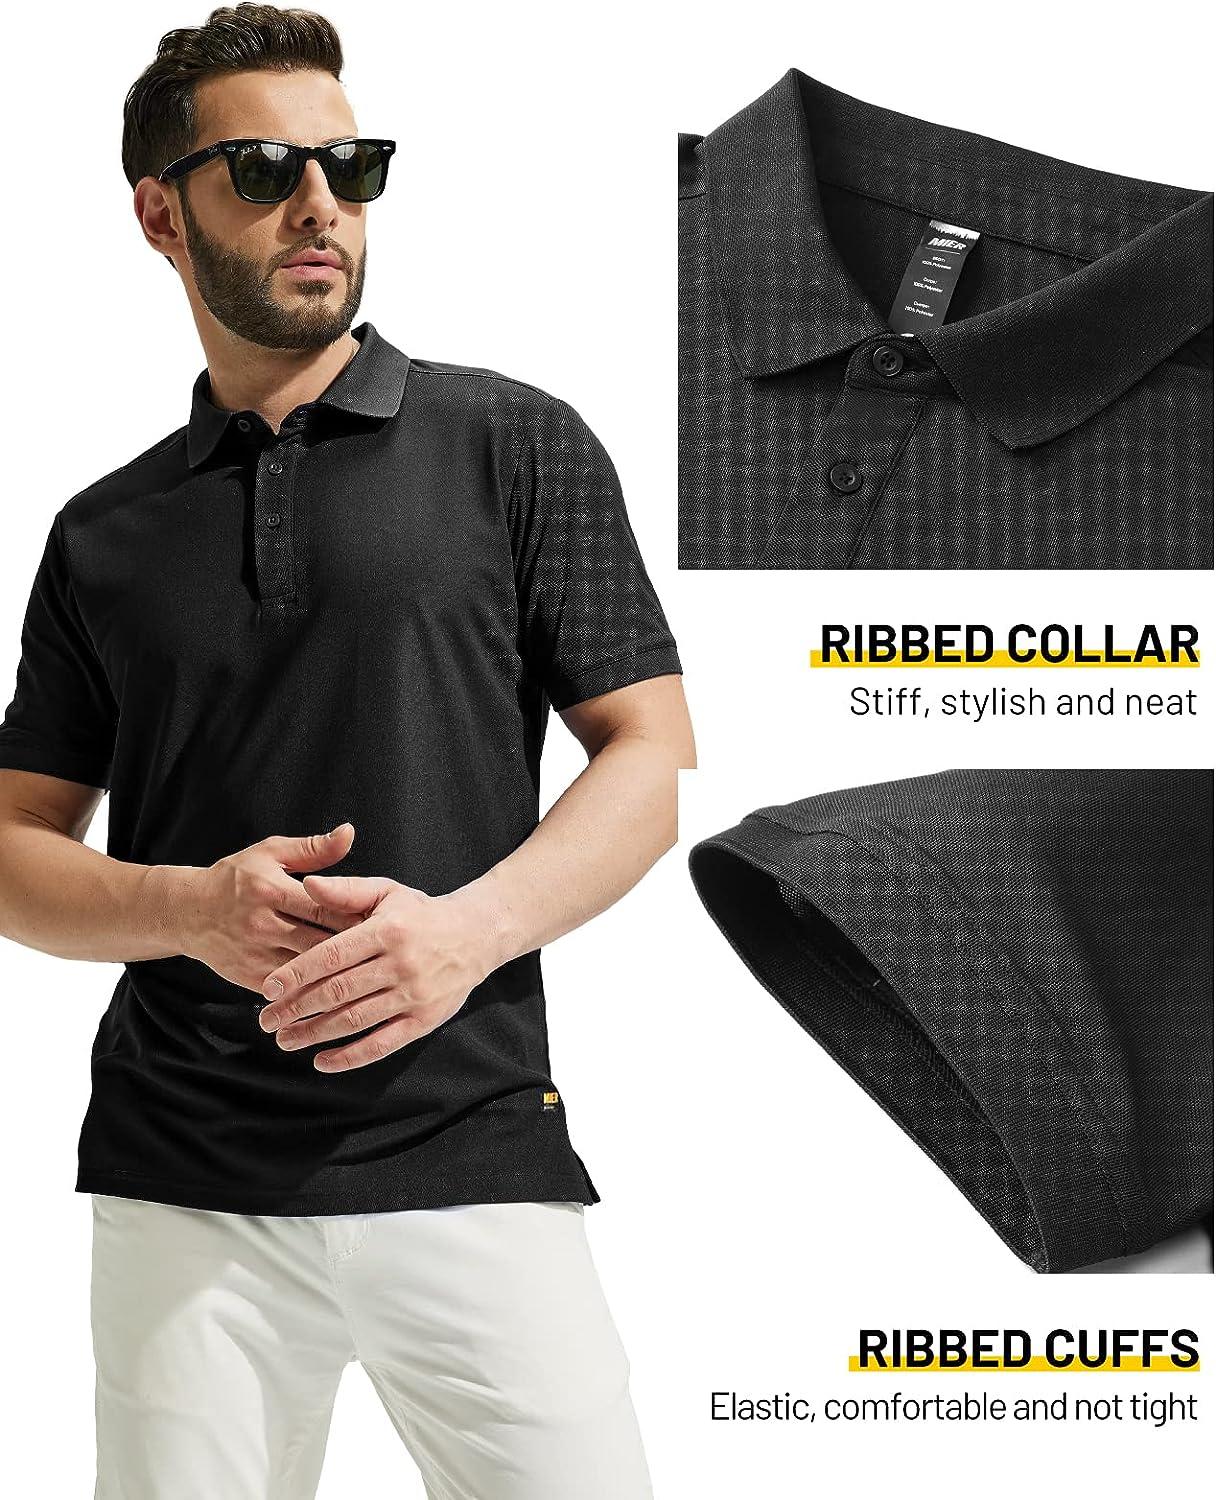 MIER Men's Golf Polo Shirts Regular-fit Fashion Casual Collared T